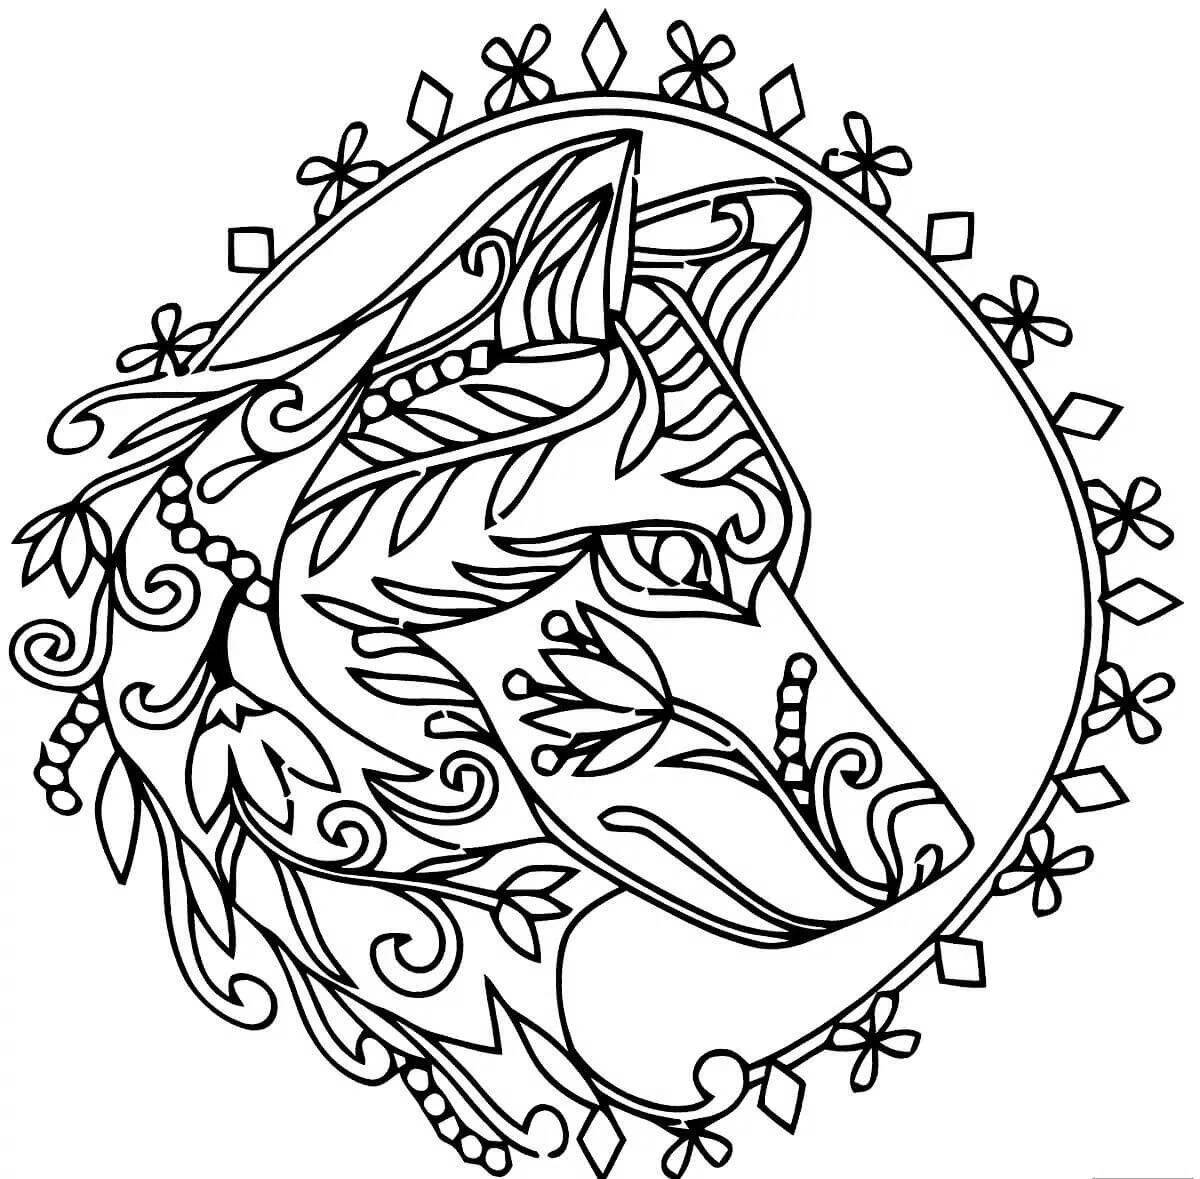 Charming coloring book antistress wolf